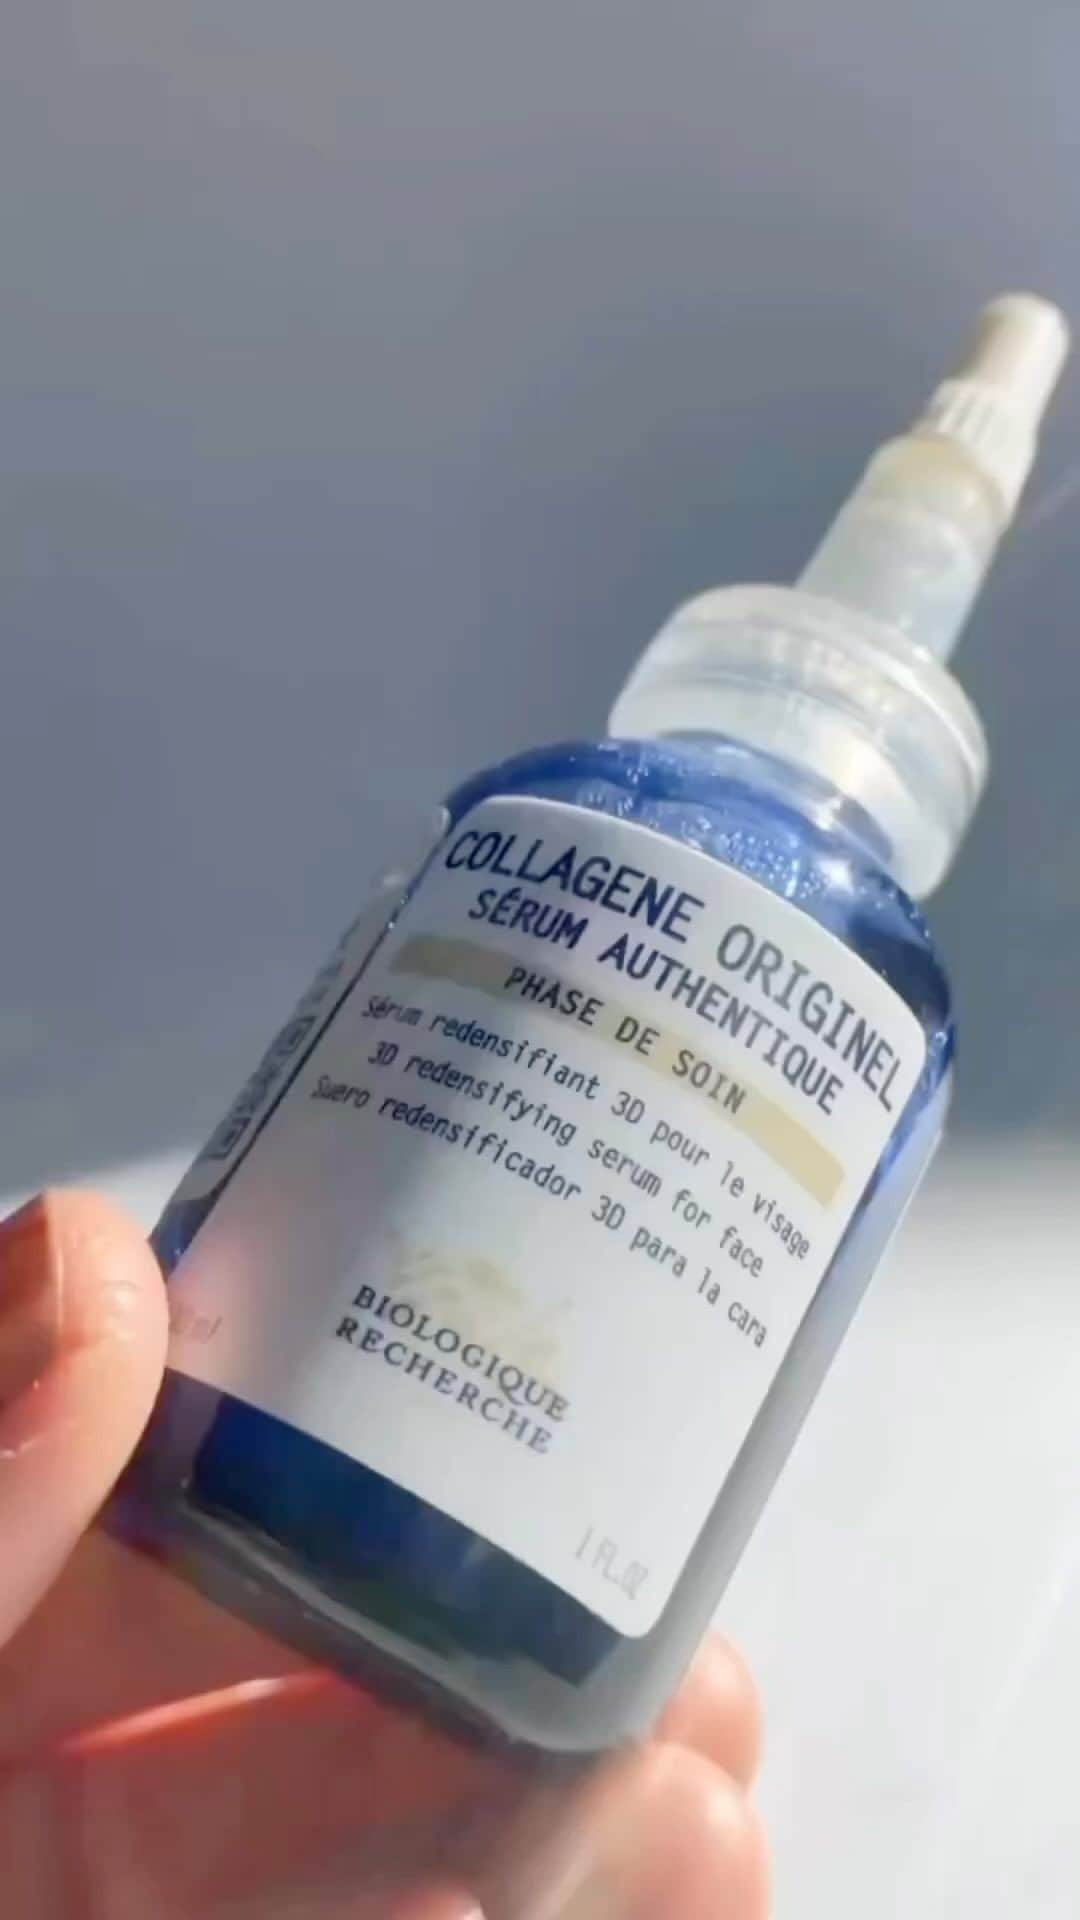 Biologique Recherche USAのインスタグラム：「A first in cosmetics and a revolutionary wrinkle treatment, Collagene Originel✨ is the unique expression of a winning combination of Type-0 collagen, a patented Biologique Recherche ingredient derived from a marine planktonic organism, silene extract, green microalgae extract, and soybean glycopeptides.   Wrinkle length is reduced thanks to our 3D re-densifying action platform that promotes the production of the four main types of collagen at the gene and protein levels.   Skin is left firmer and smoother, and the appearance of fine lines and wrinkles is reduced over time.   #BiologiqueRecherche #FollowYourSkinInstant #BuildingBetterSkin #radiantskin #CollageneOriginel #Type0Collagen #wrinkletreatment」